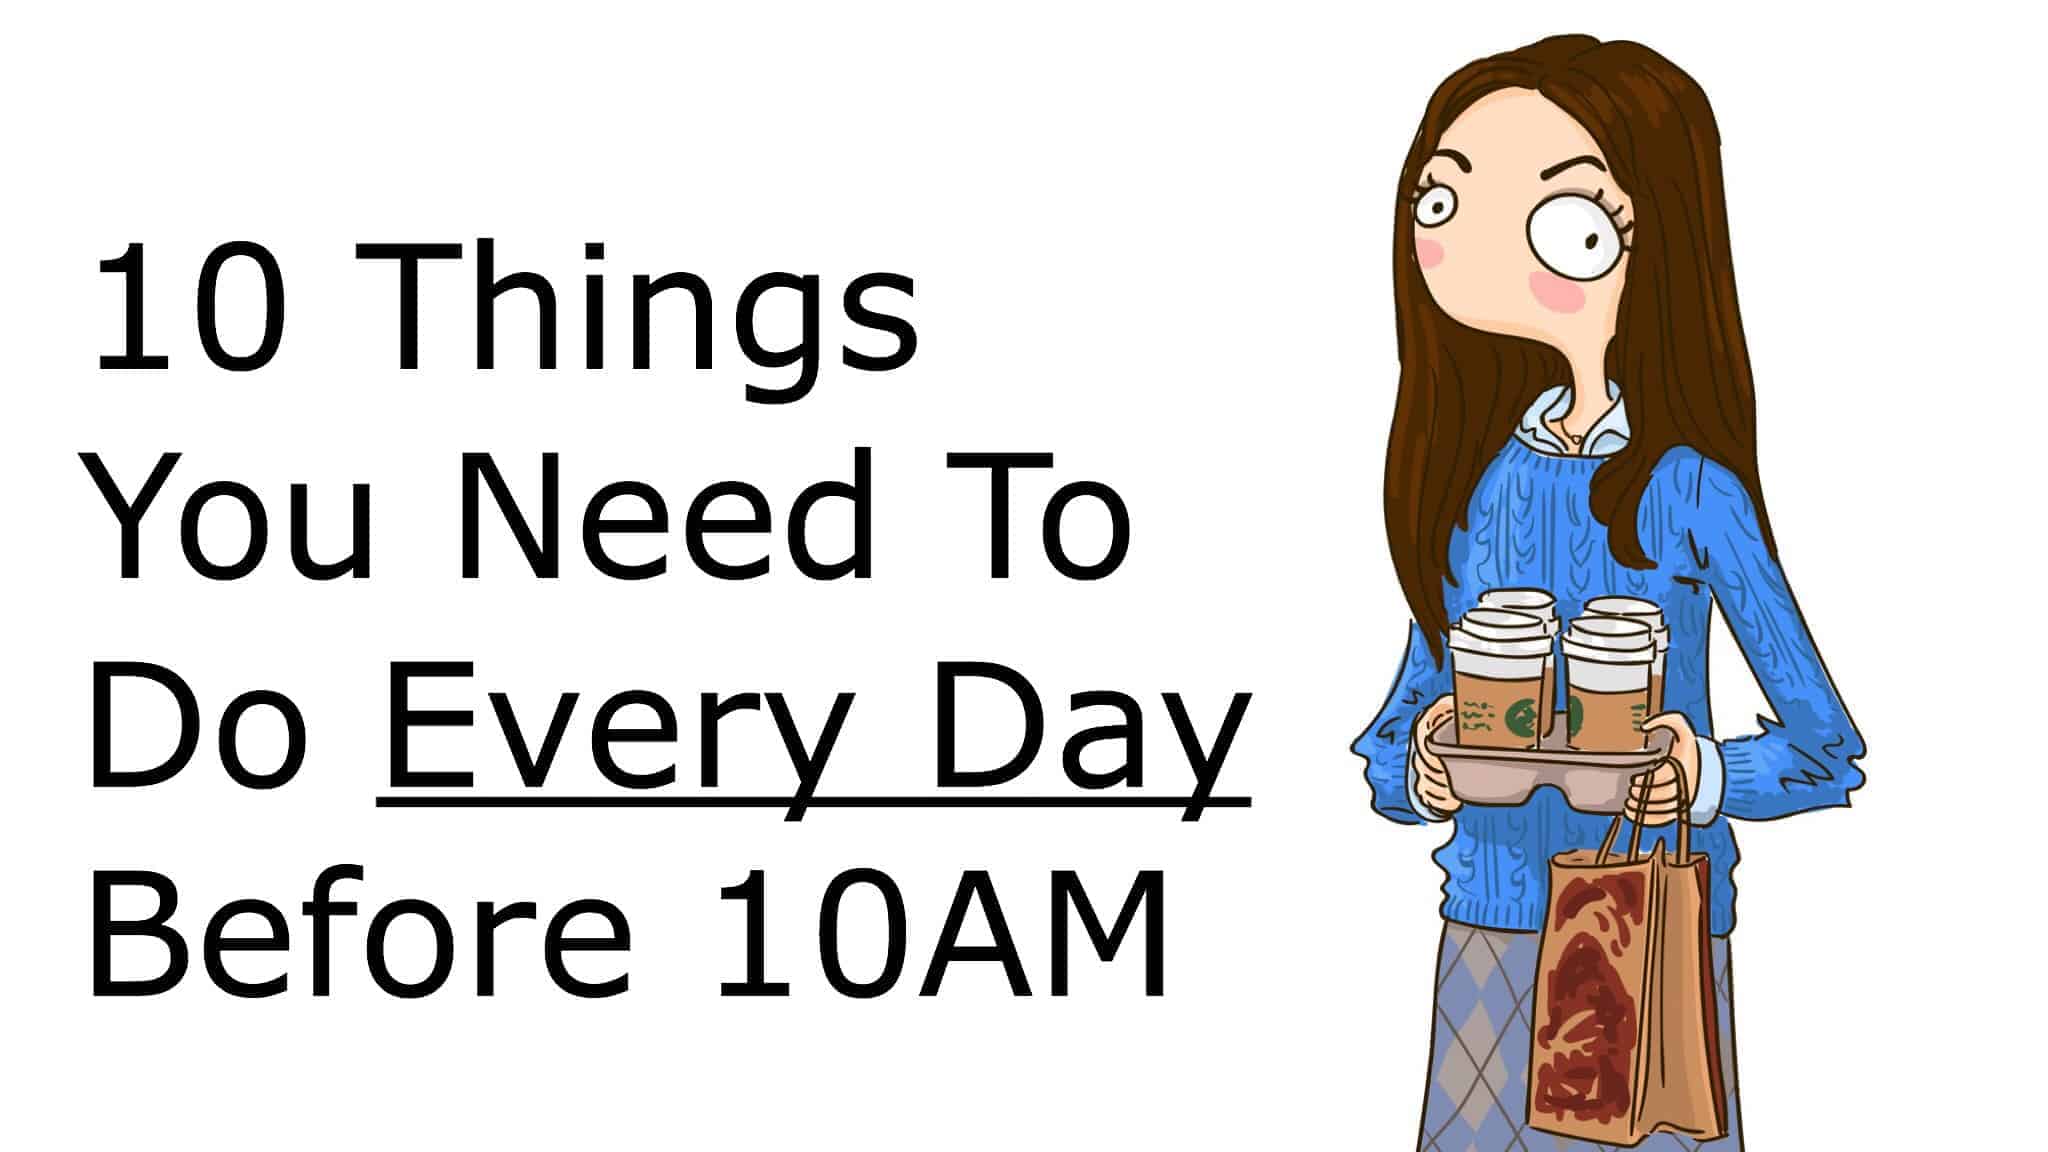 10 Things You Need To Do Every Day Before 10AM